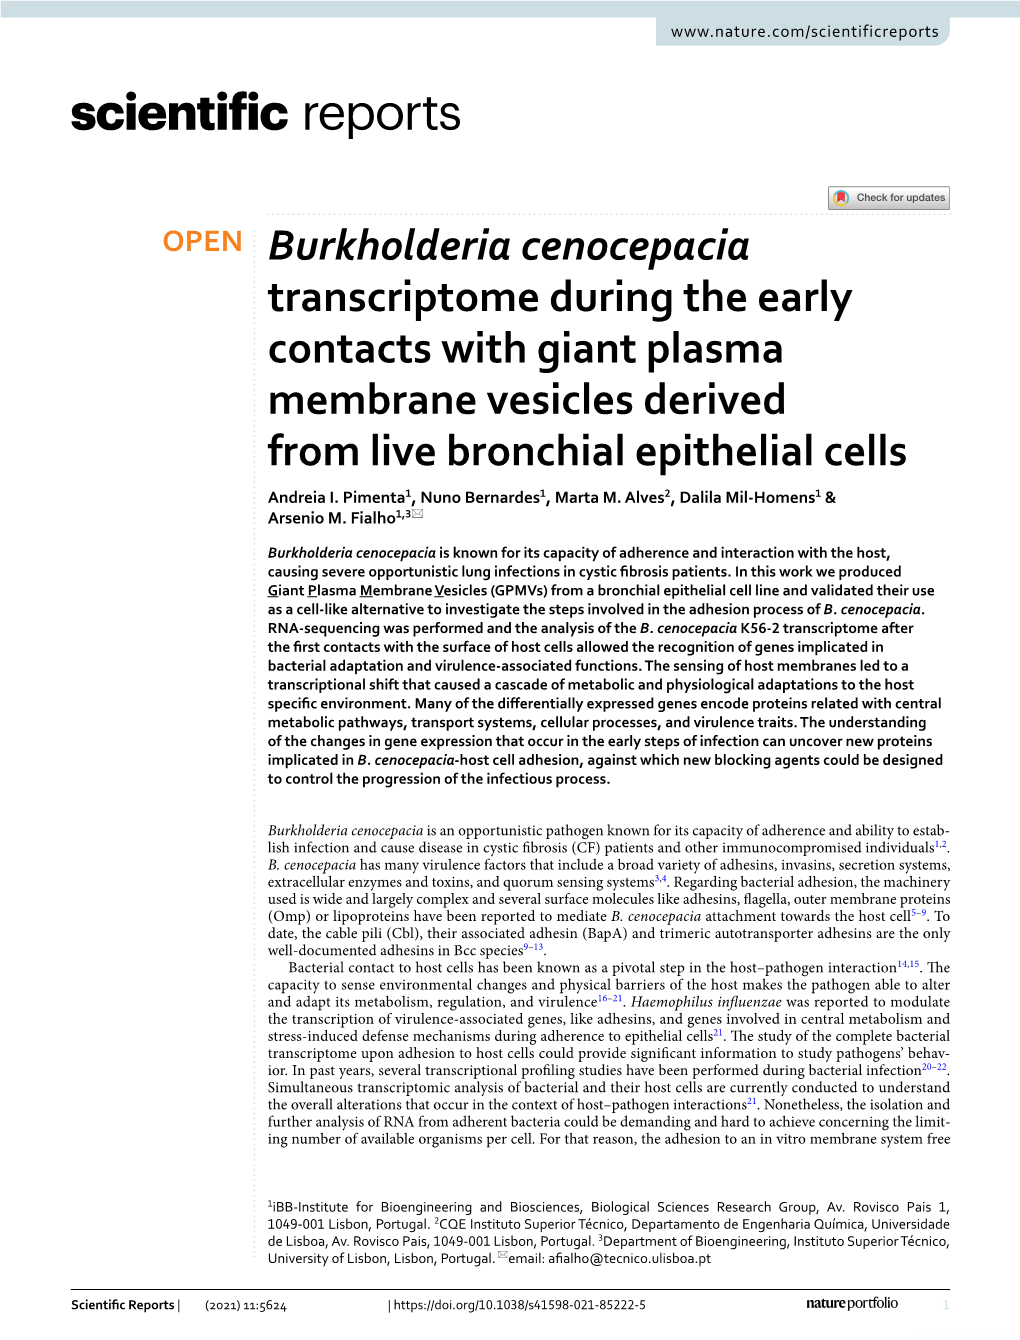 Burkholderia Cenocepacia Transcriptome During the Early Contacts with Giant Plasma Membrane Vesicles Derived from Live Bronchial Epithelial Cells Andreia I